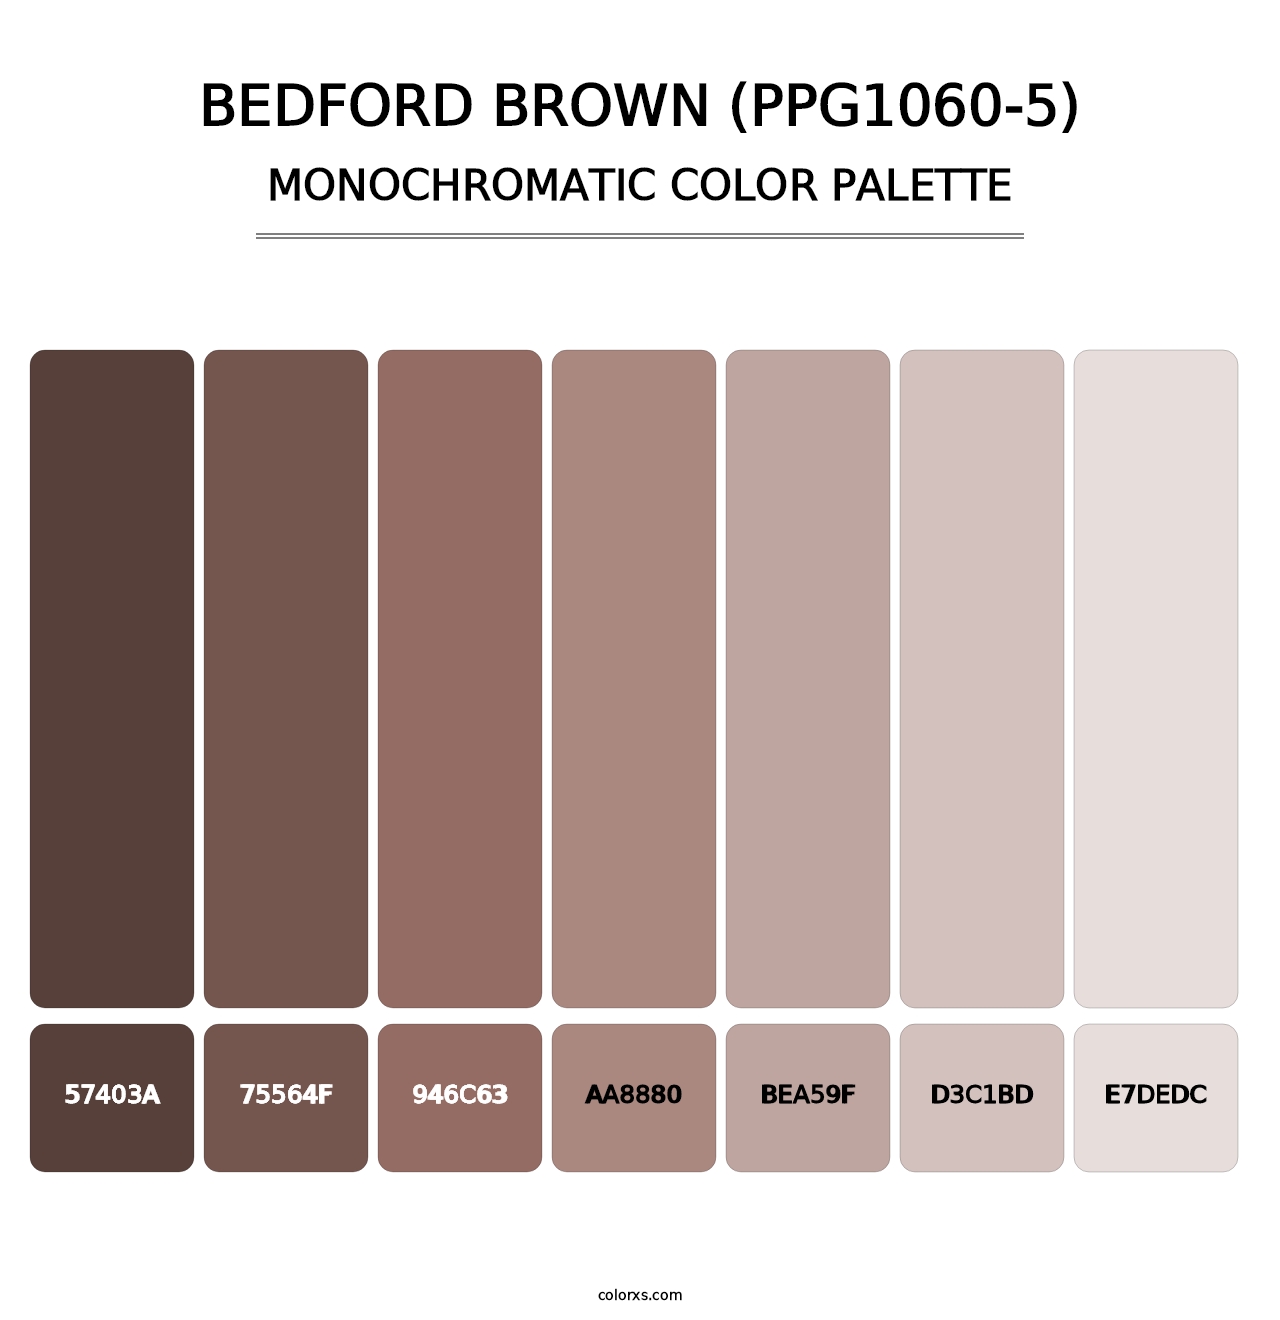 Bedford Brown (PPG1060-5) - Monochromatic Color Palette